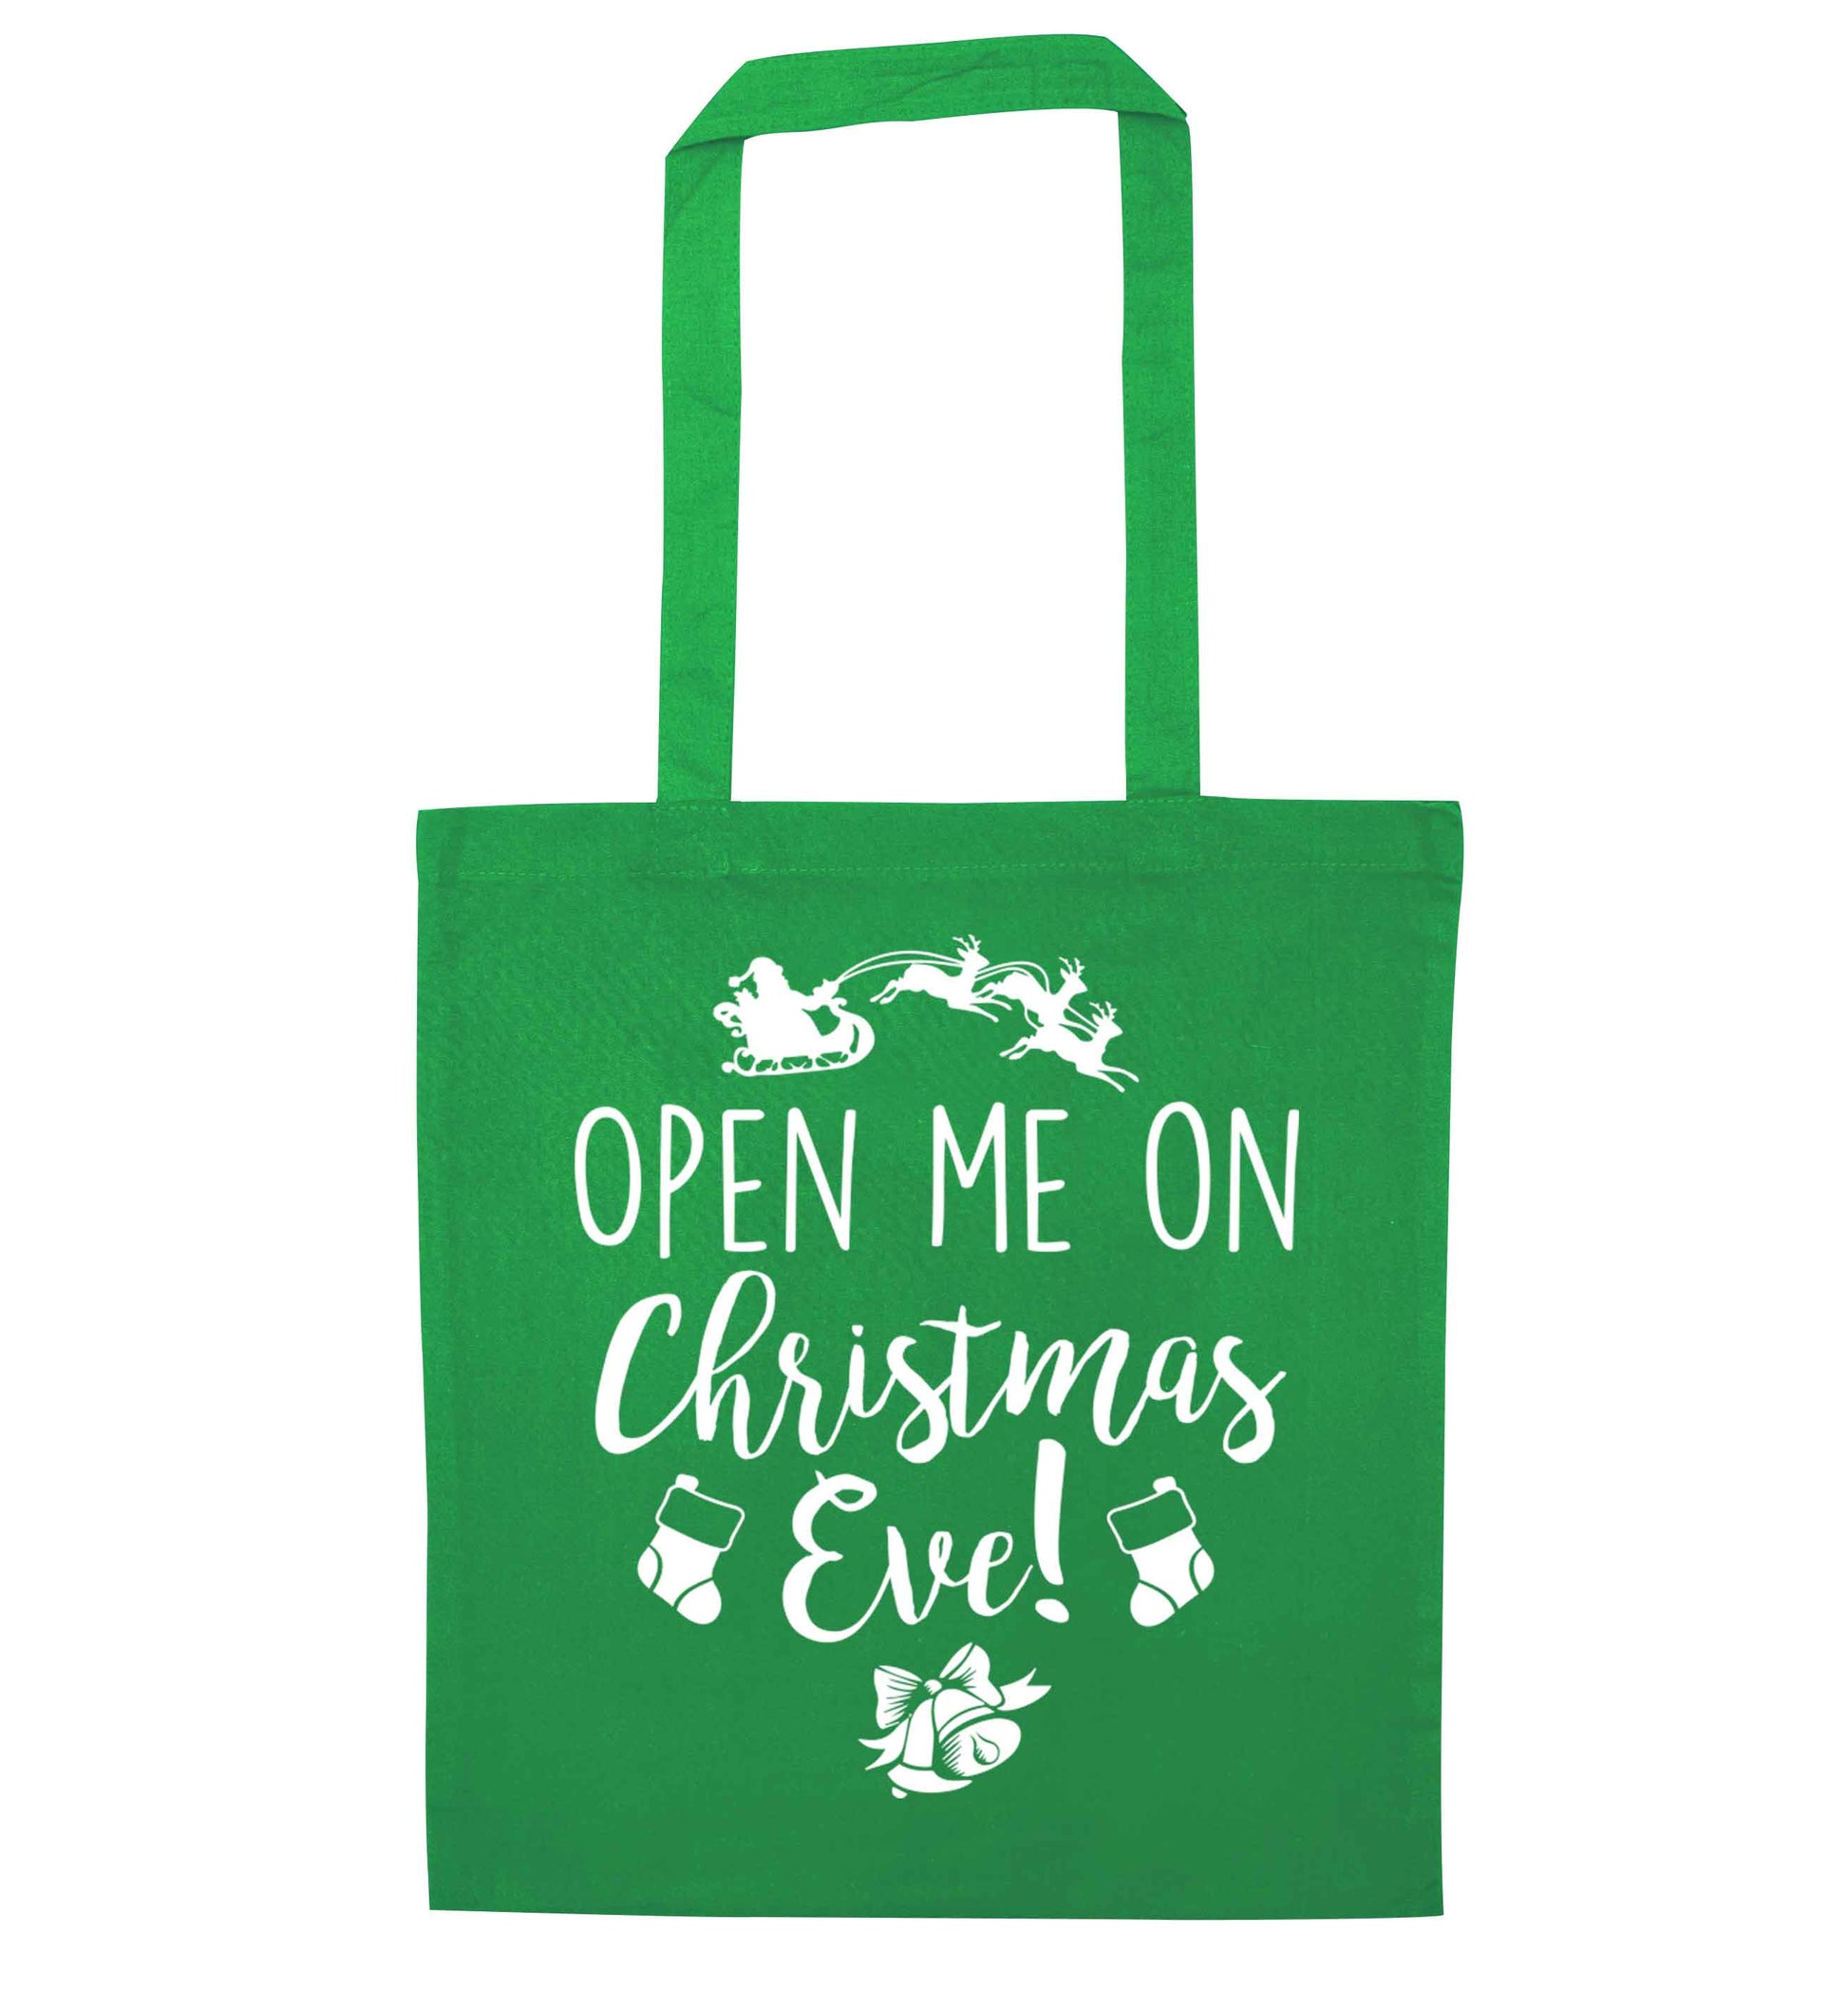 Open me on Christmas Day green tote bag